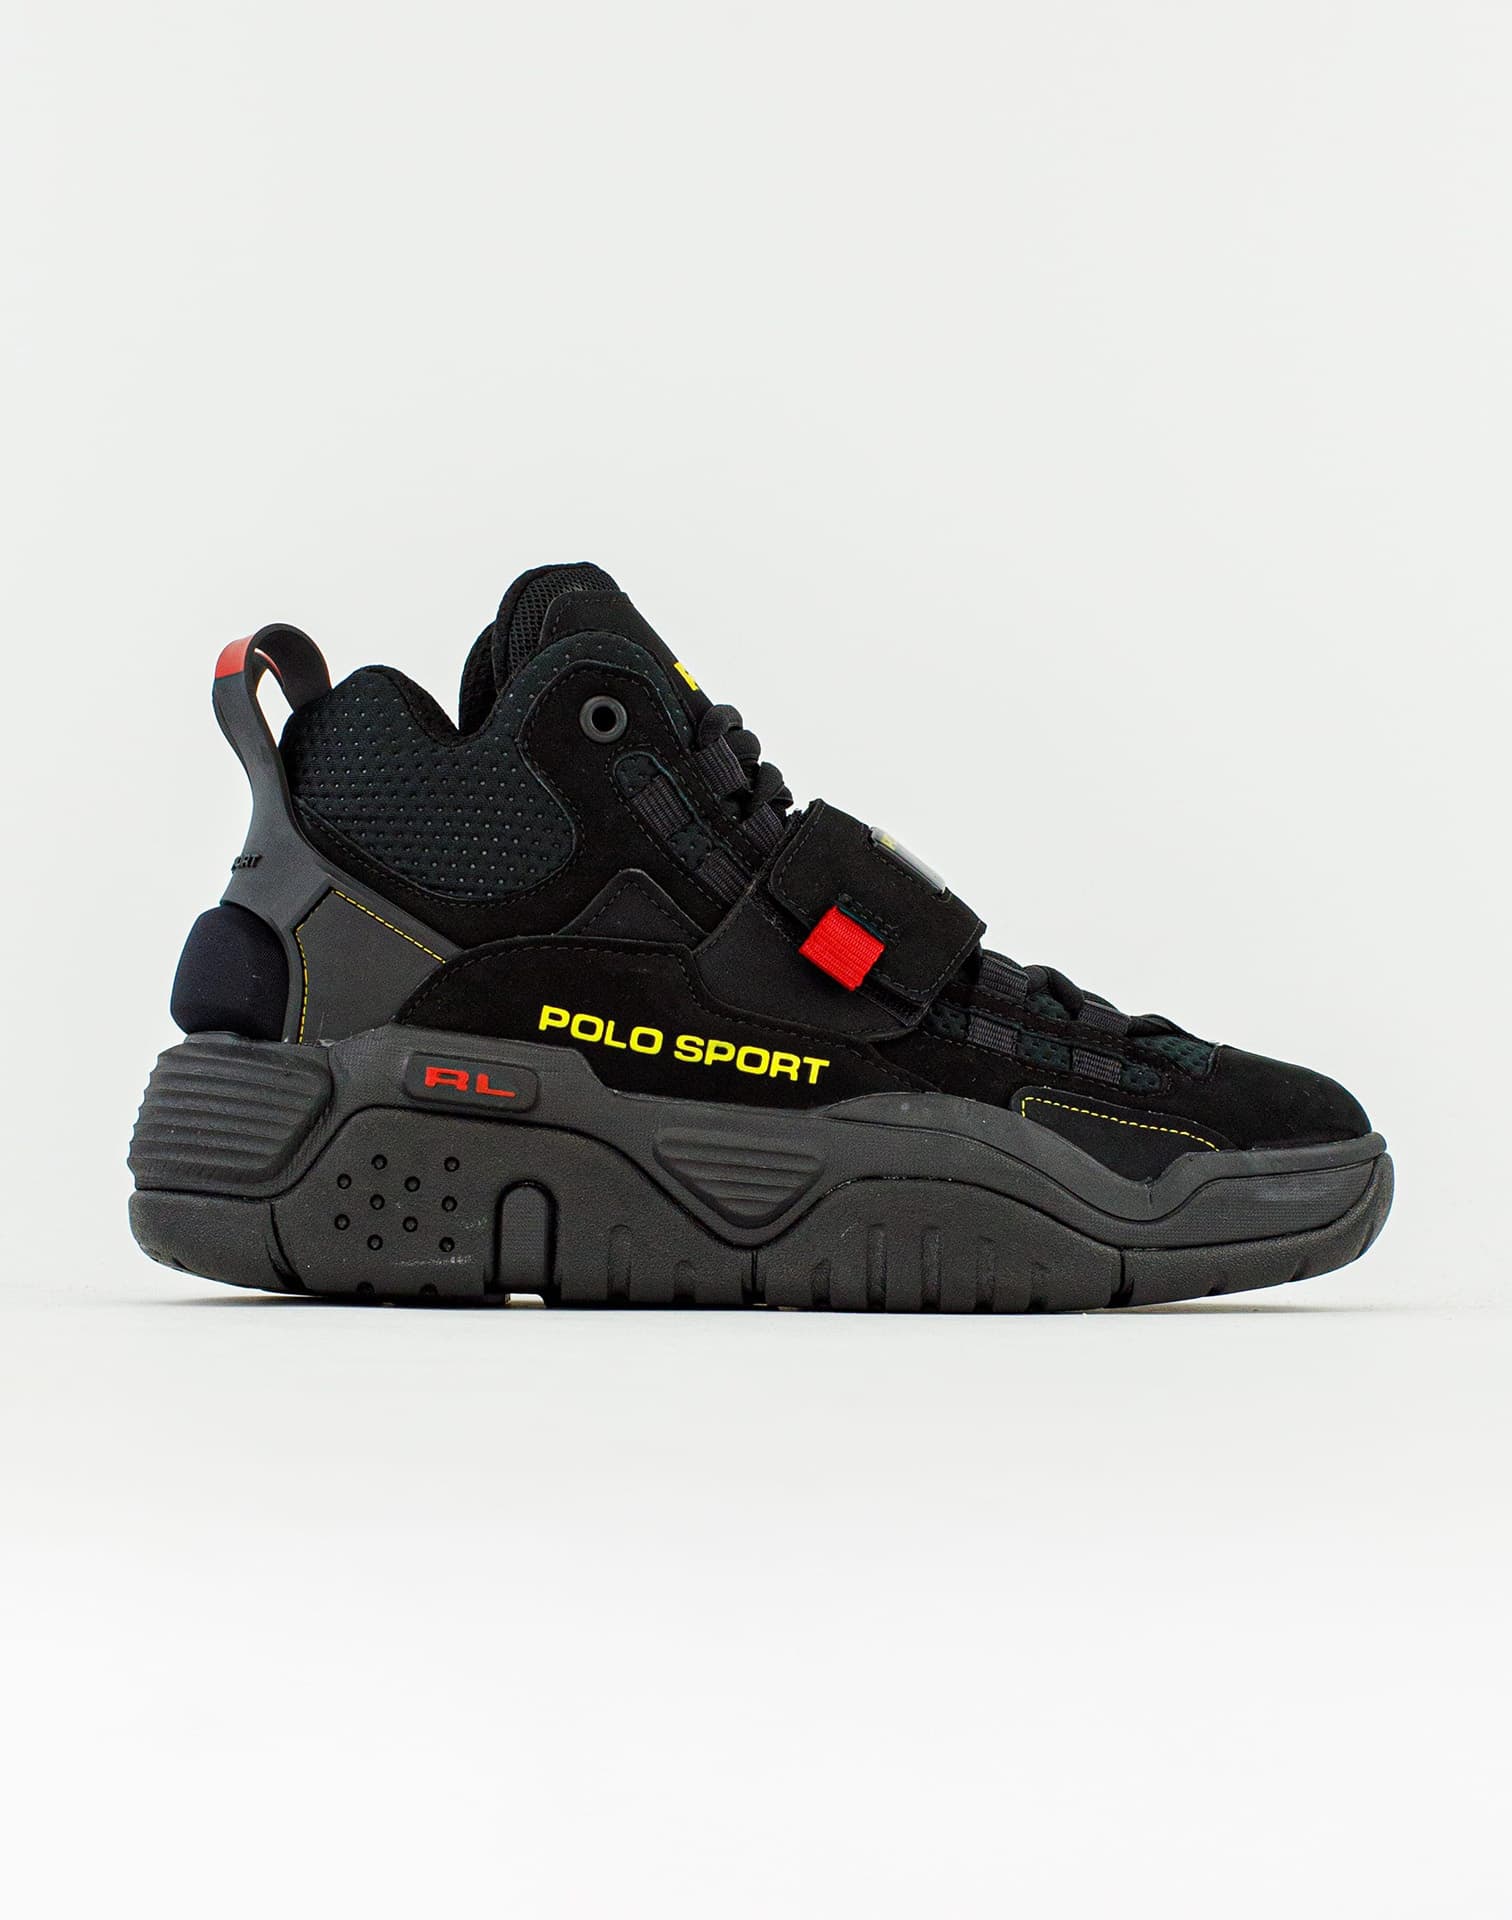 Polo Sport Ps100 High-Top – DTLR